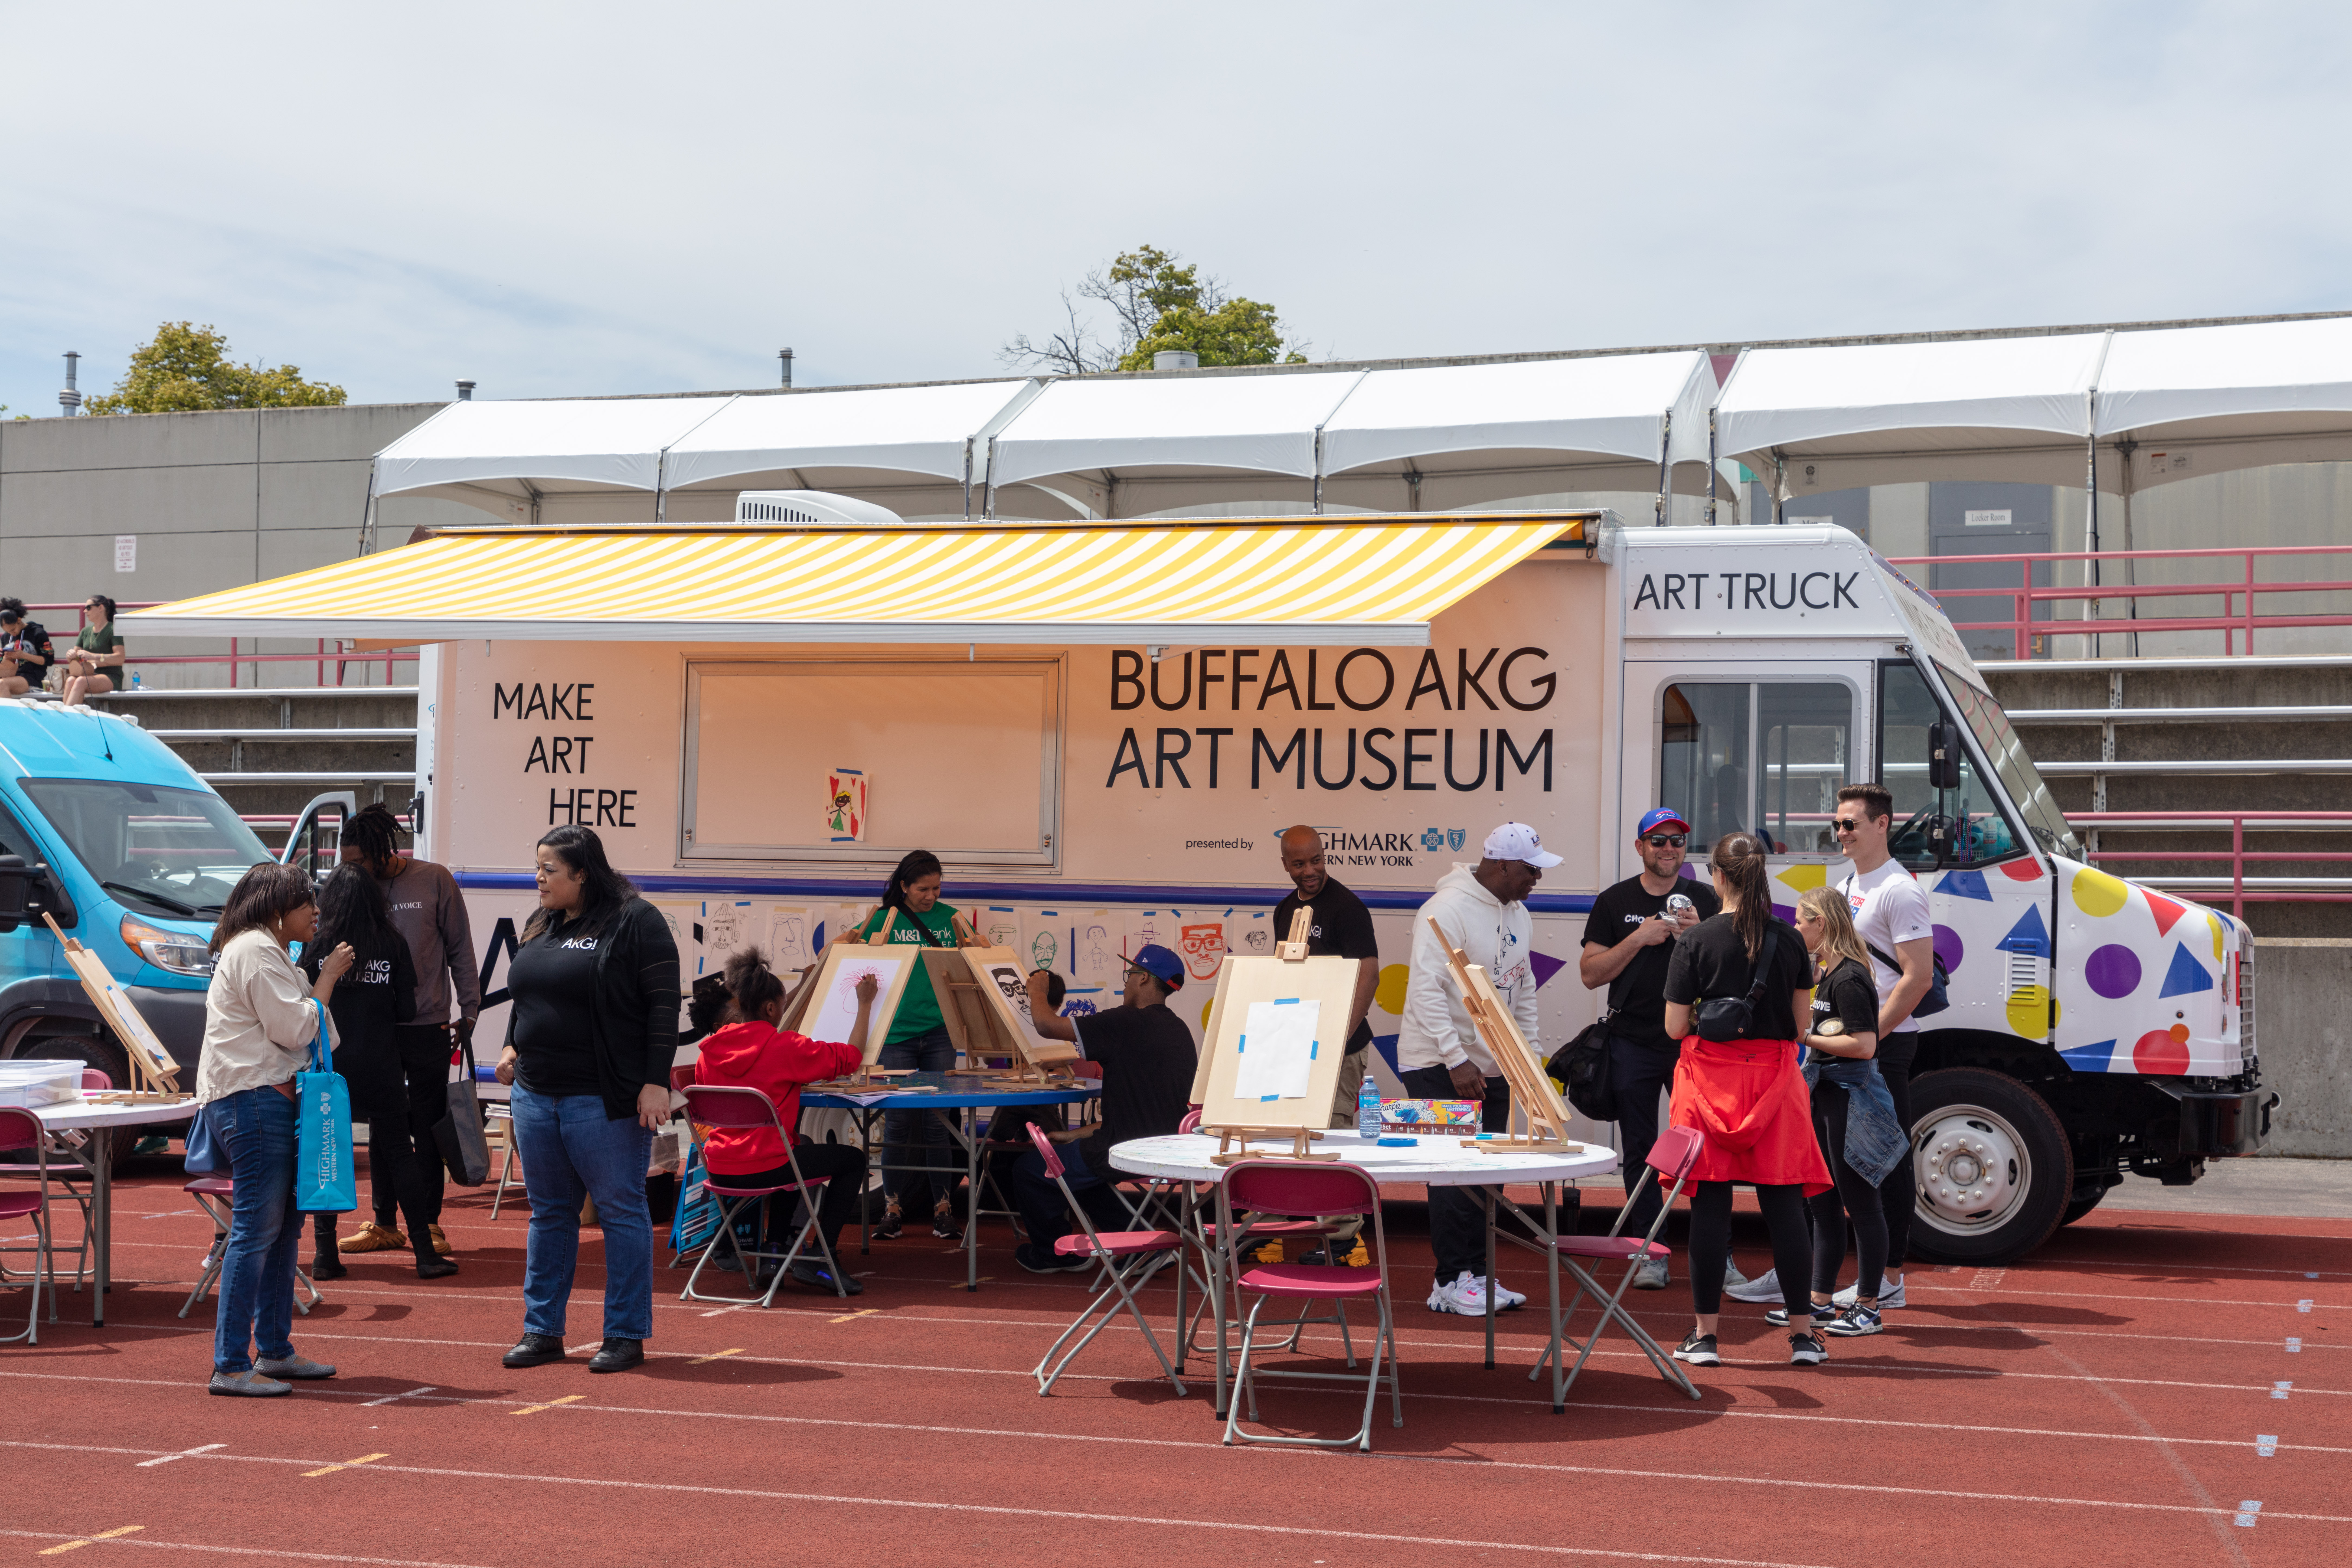 A group of people participate in artwork activities at several tables in front of the Buffalo AKG Art truck (that is white with a yellow striped awning) 